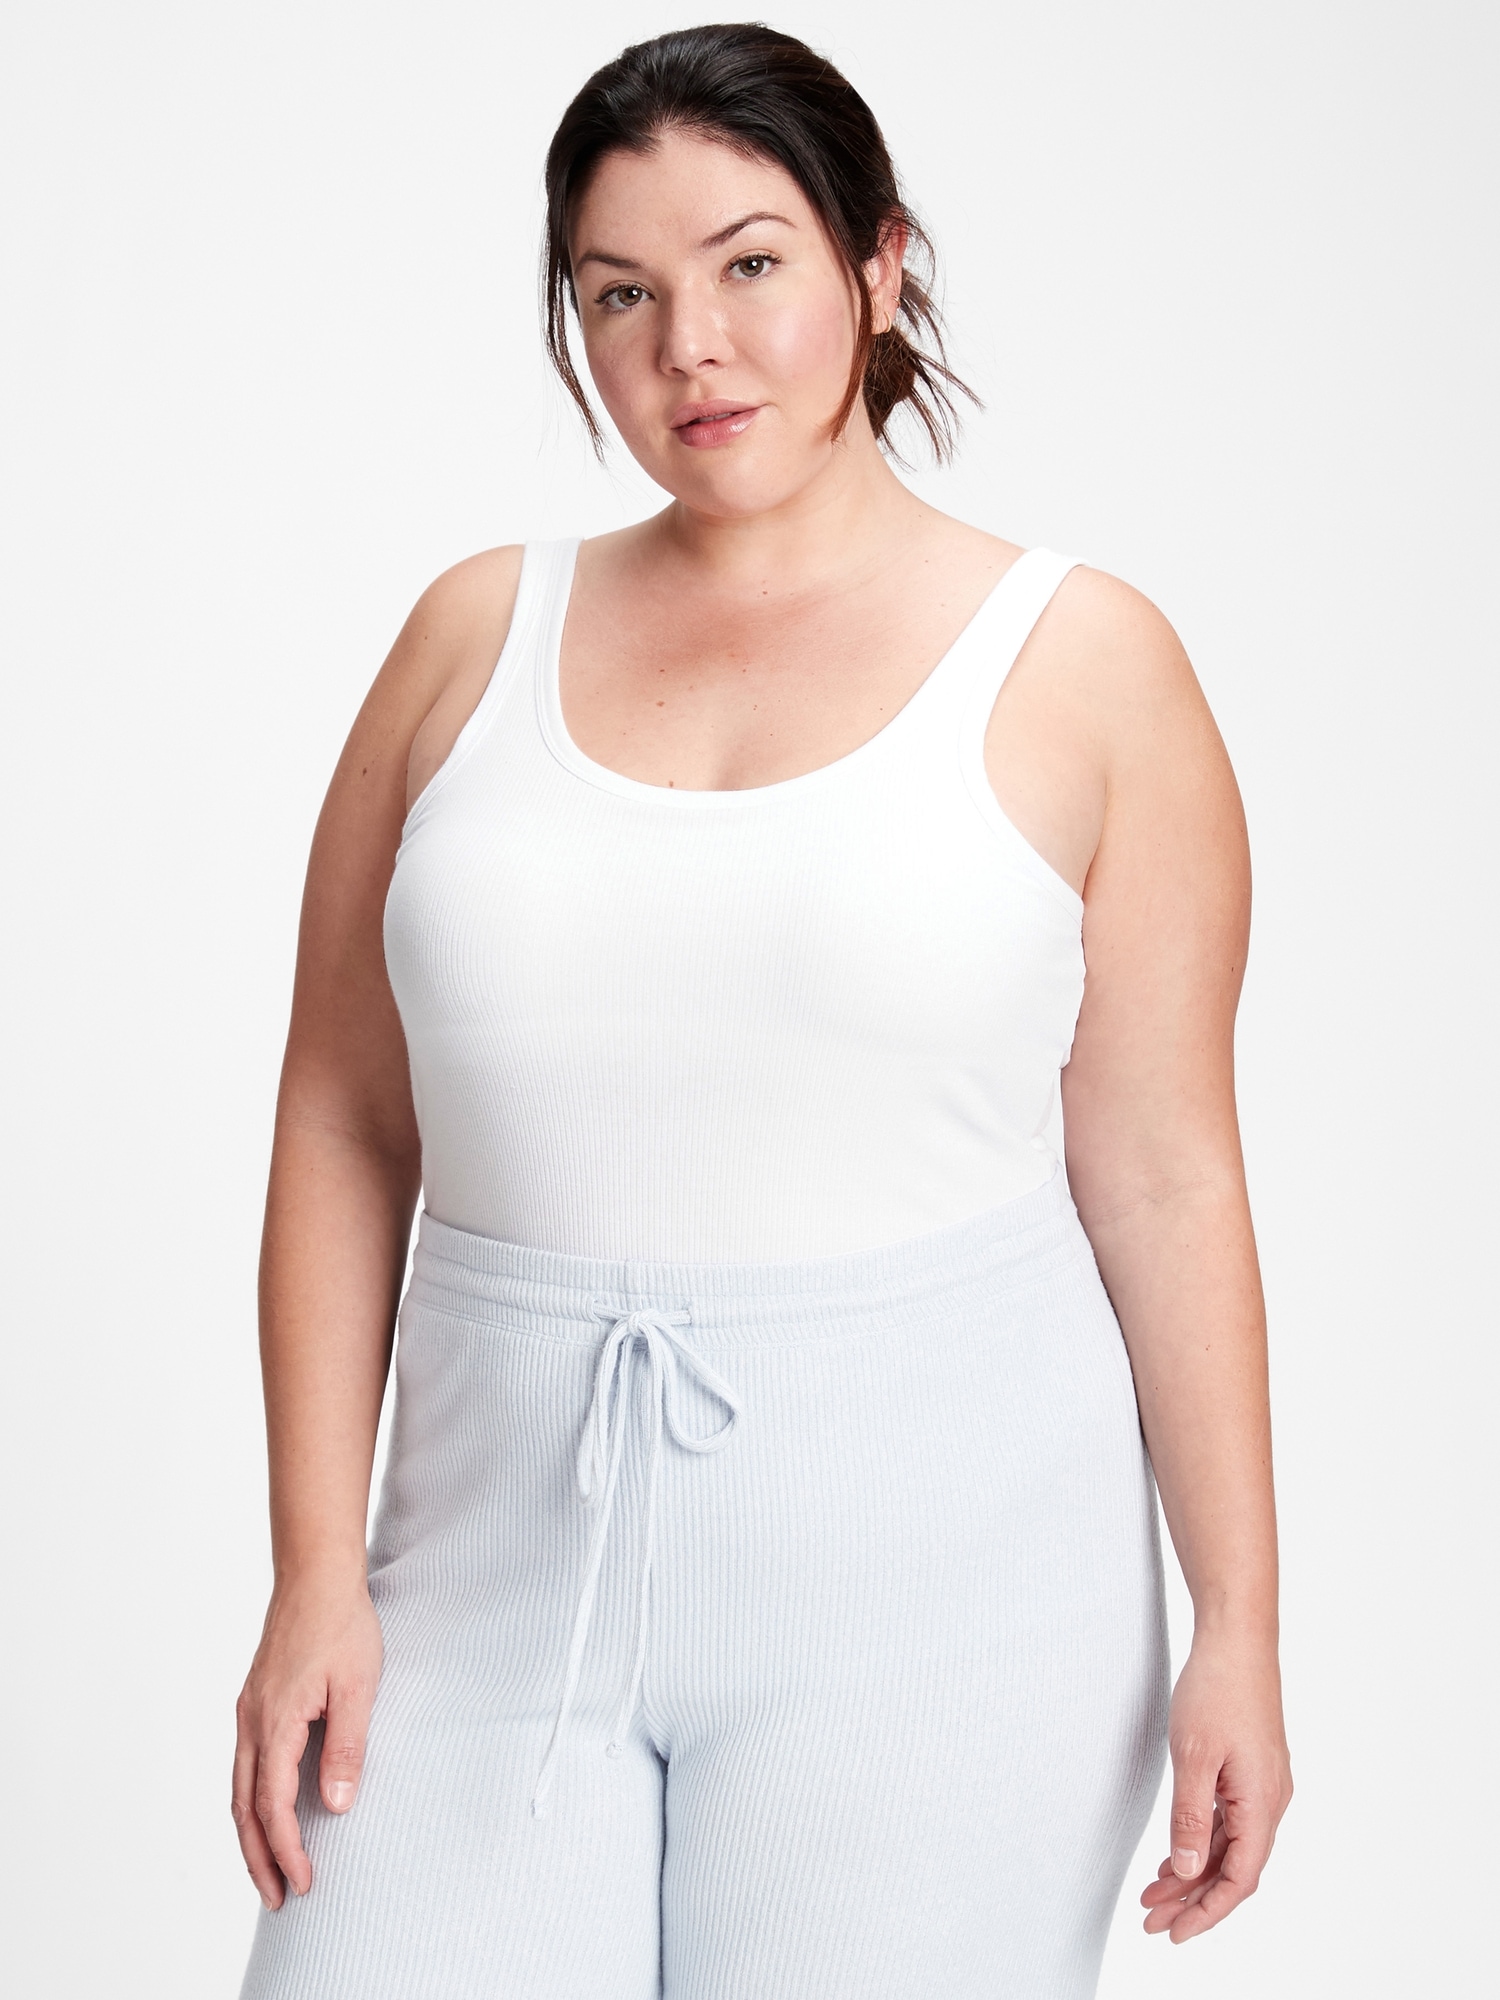 Gap Forever Favorite Support Tank Top white. 1